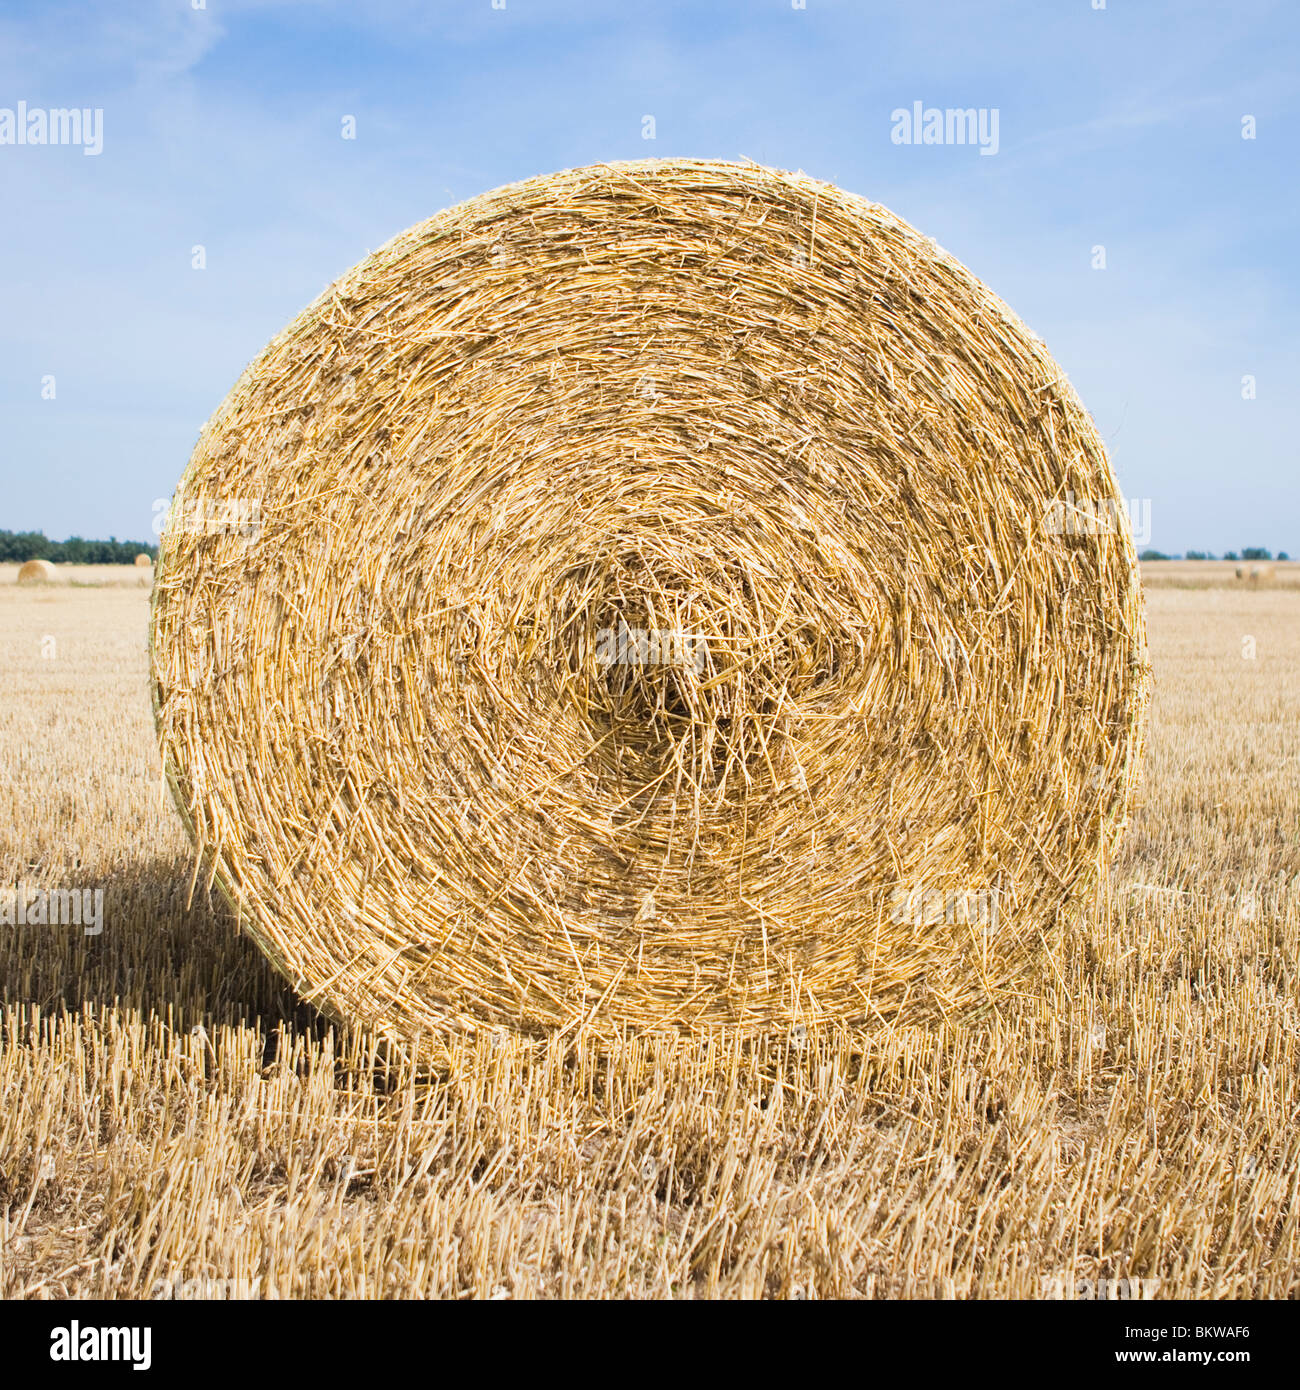 Big hay bale on a field Stock Photo